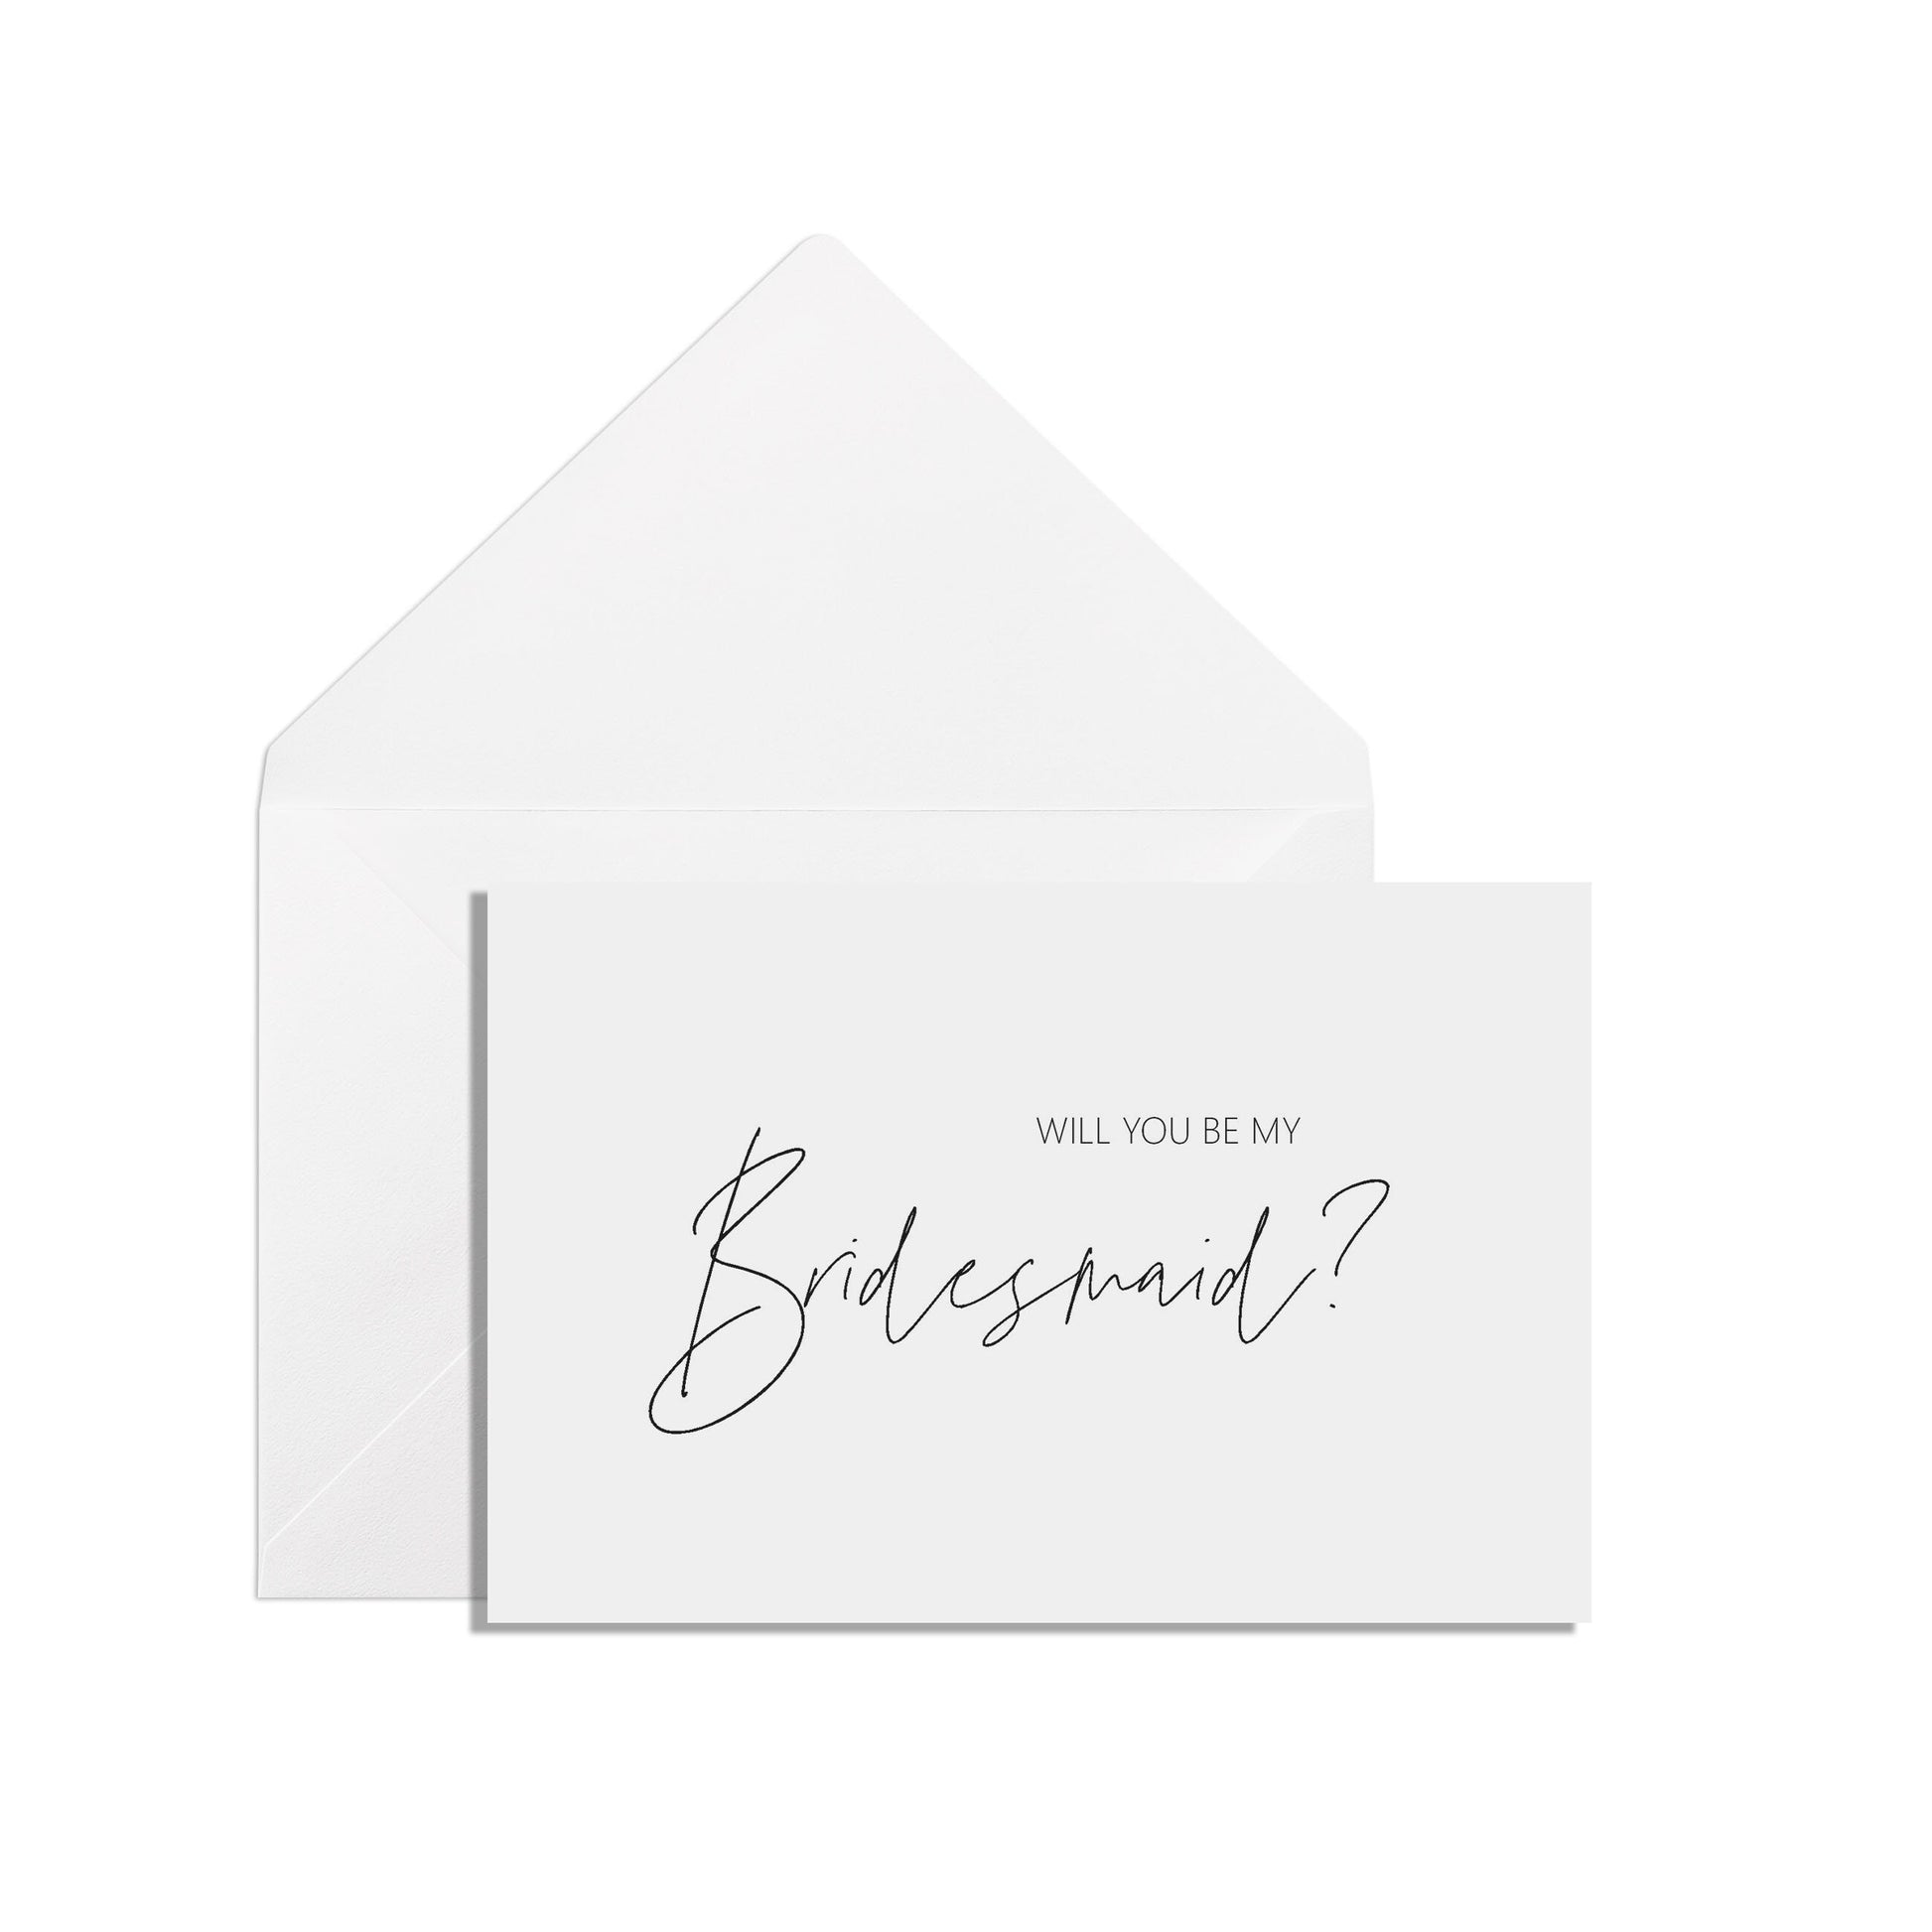 Will You Be My Bridesmaid? A6 Black & White Proposal Card With White Envelope